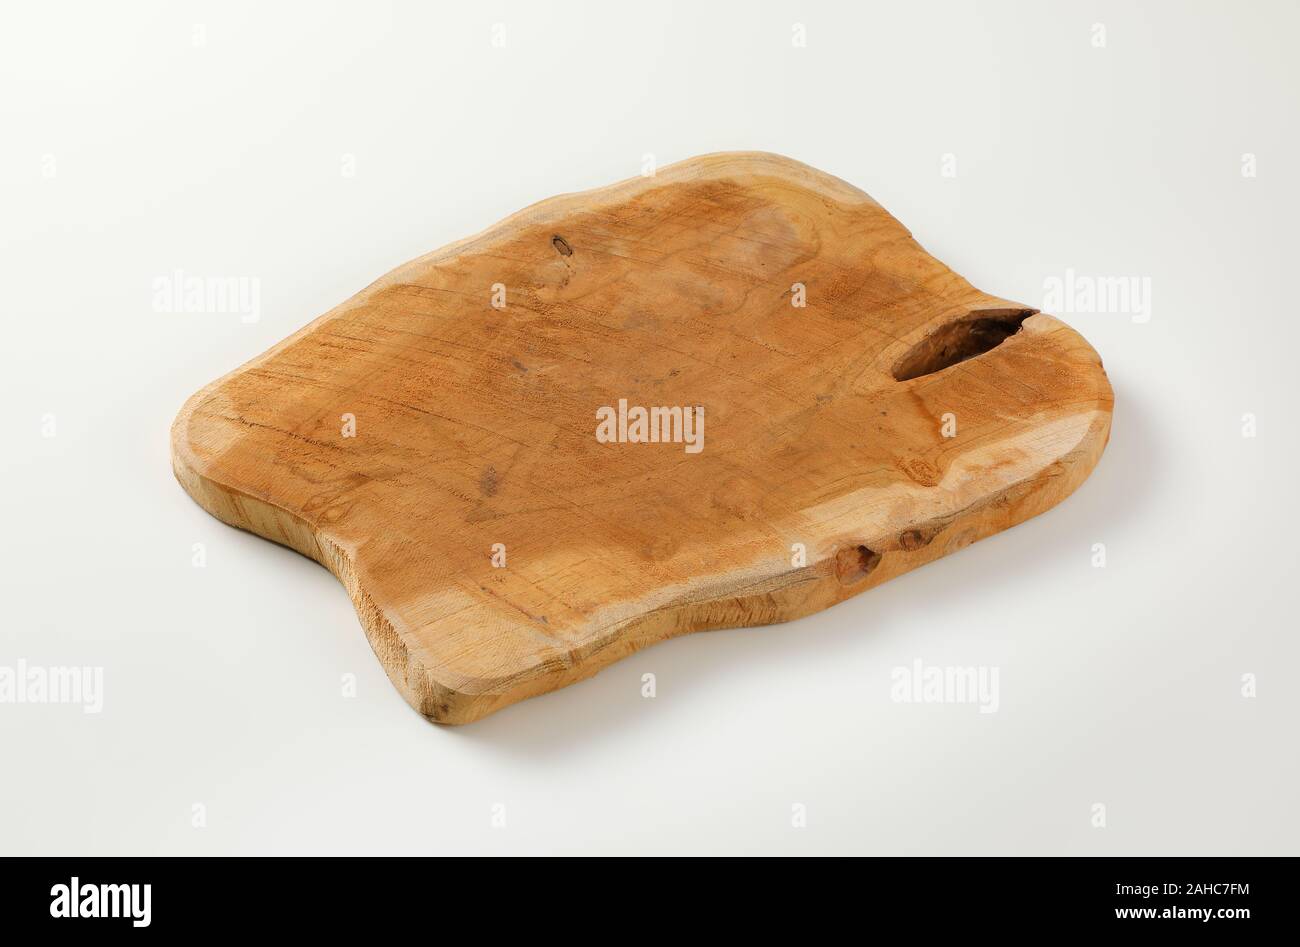 Live edge wooden cutting or serving board Stock Photo